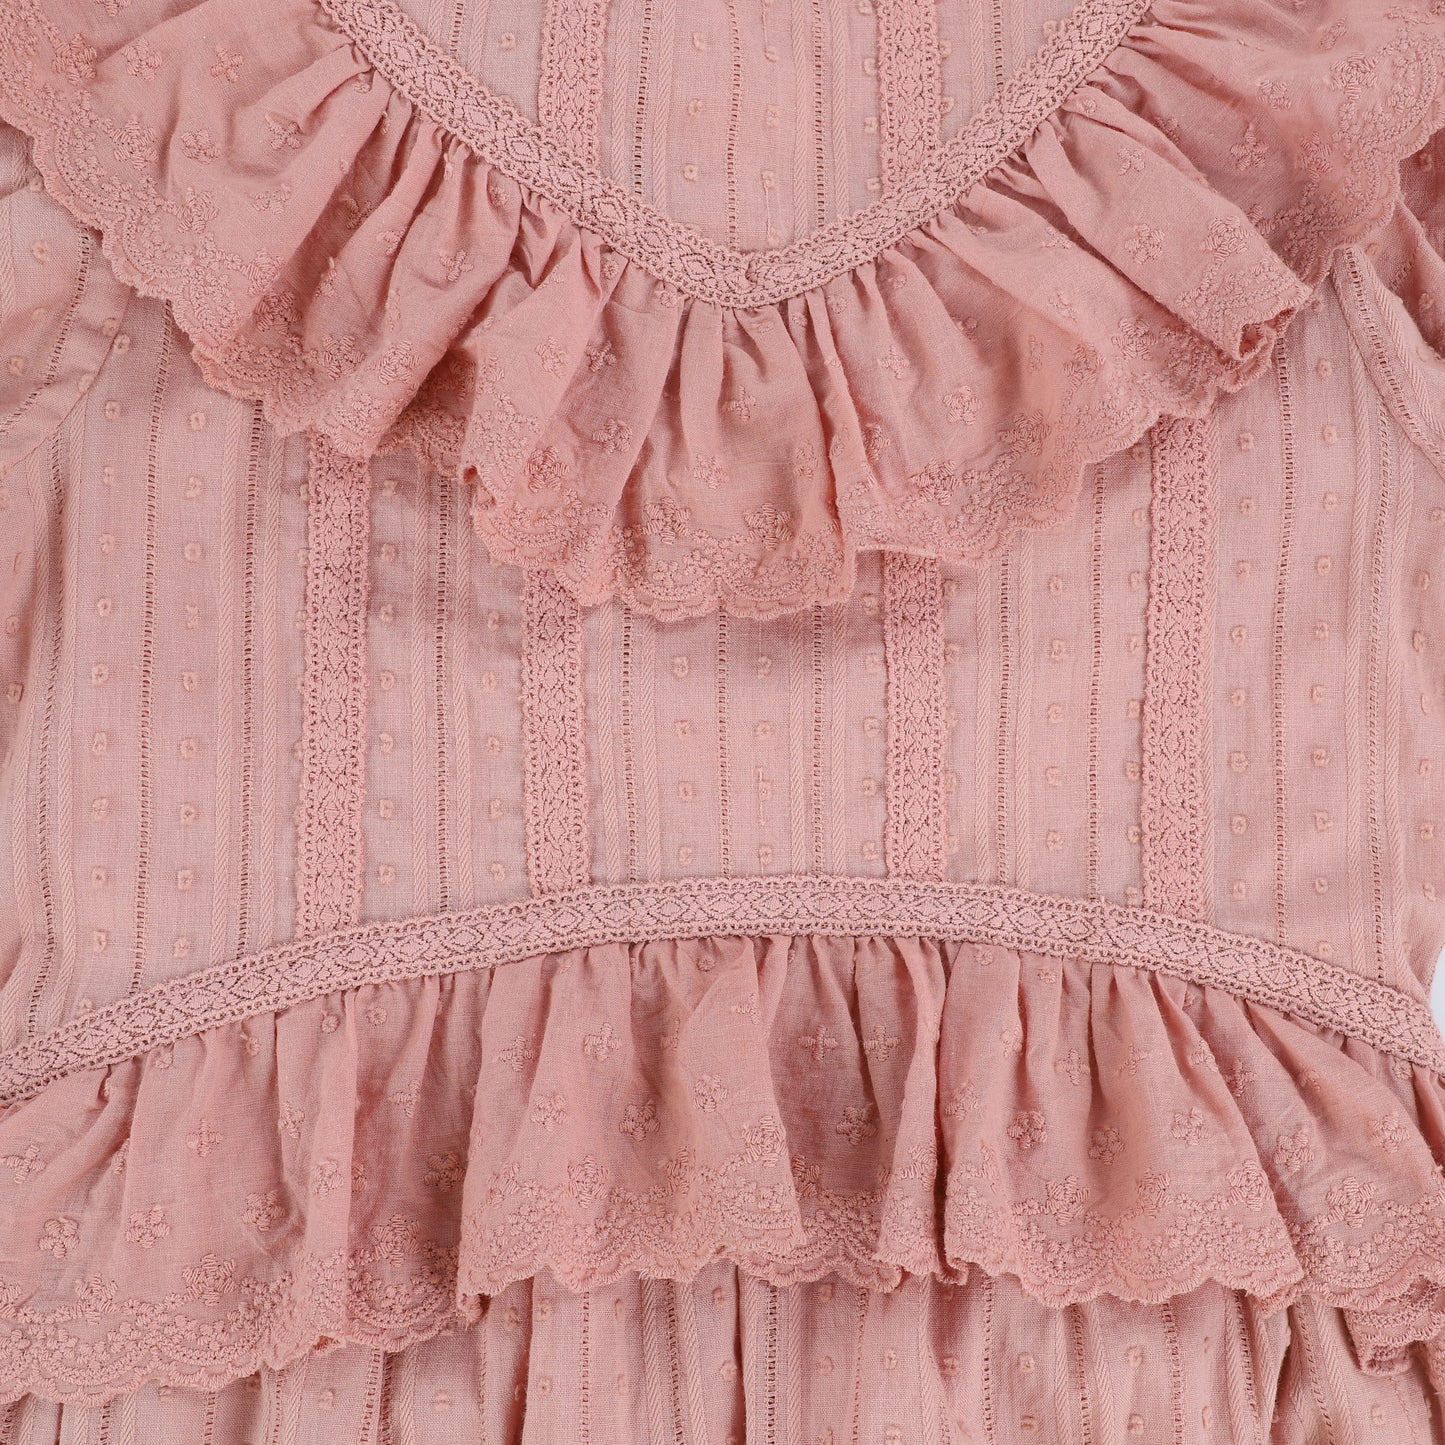 BAMBOO PINK EMBROIDERED LACE RUFFLE DRESS [Final Sale]